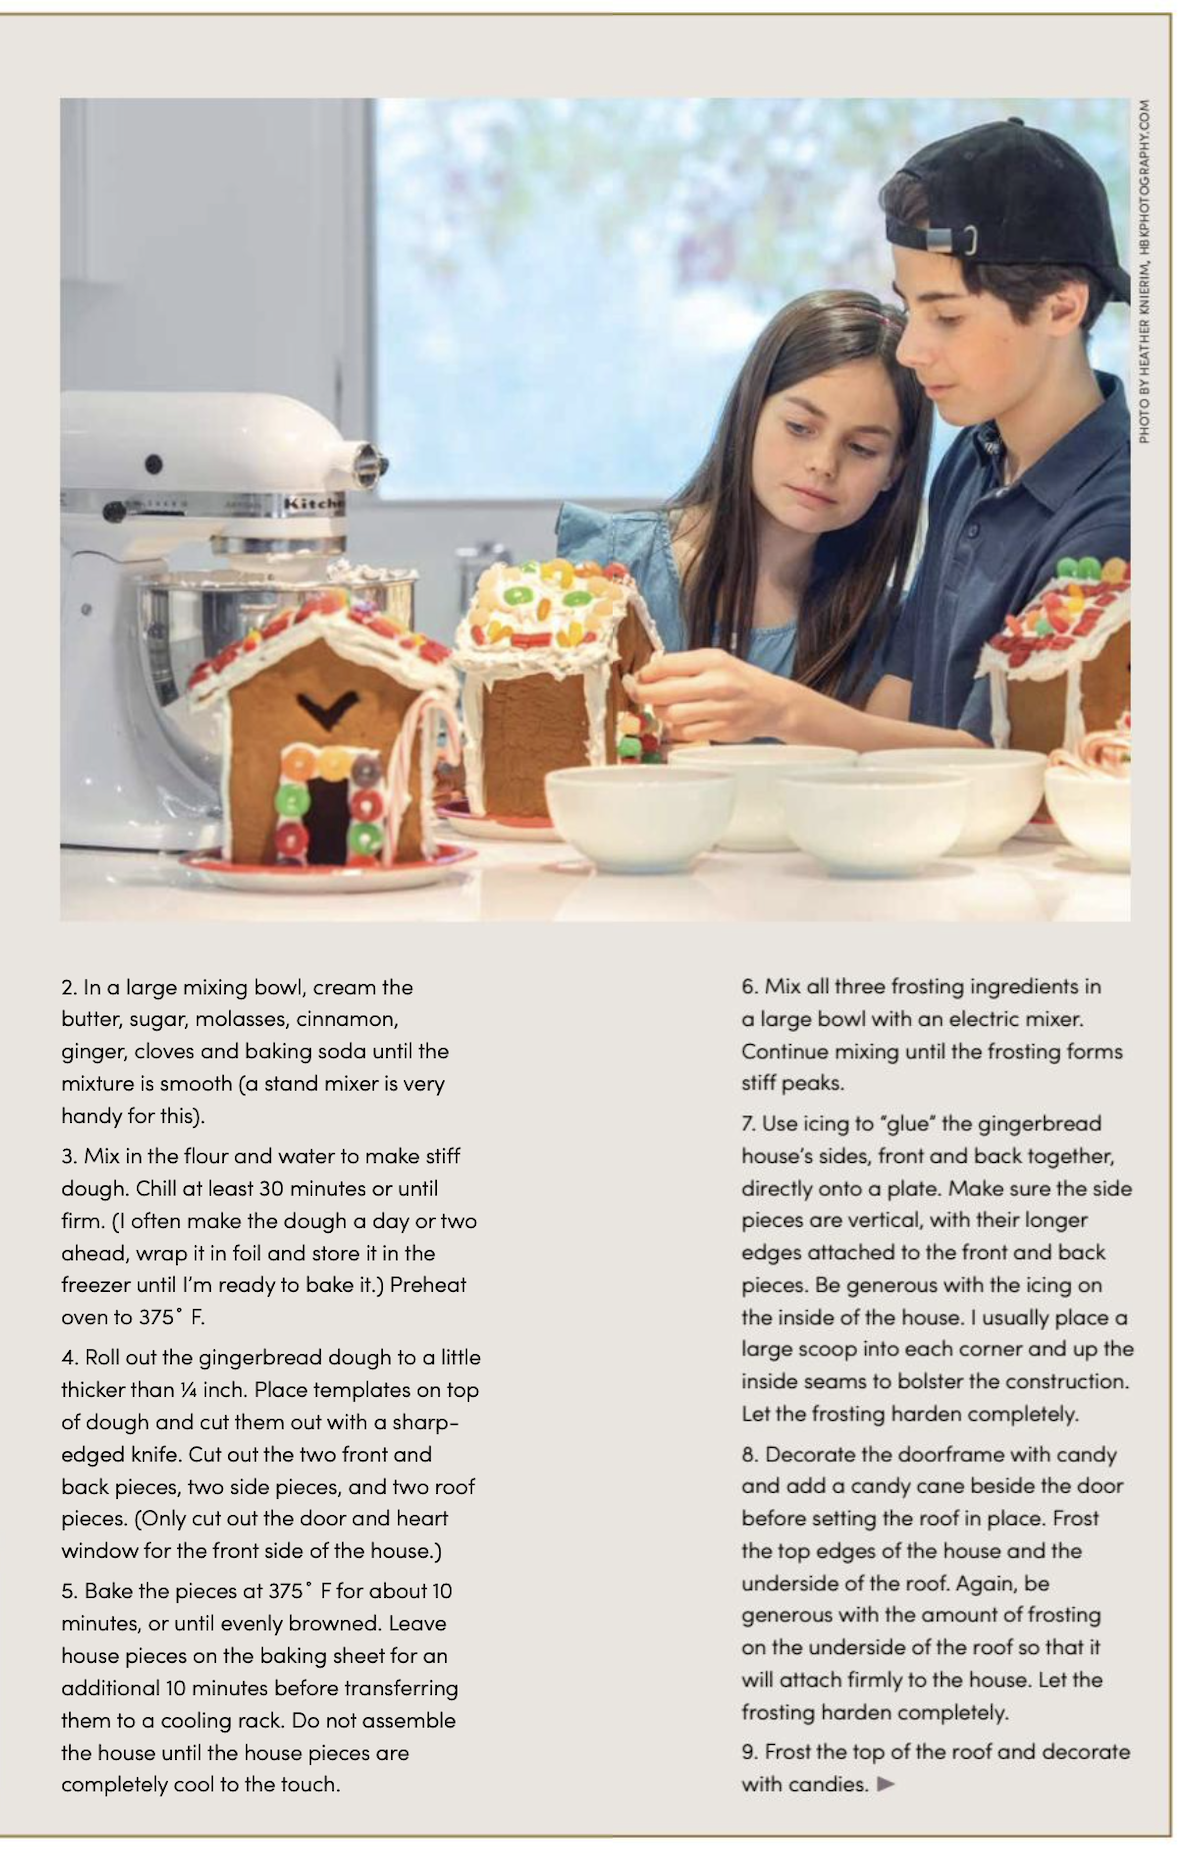 gingerbread house article